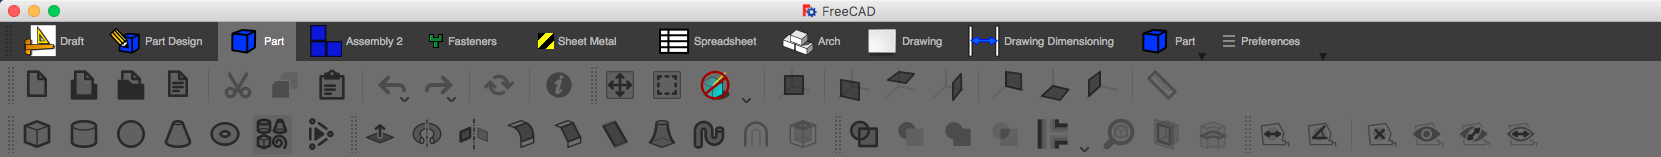 Simple iconTheme for FreeCAD